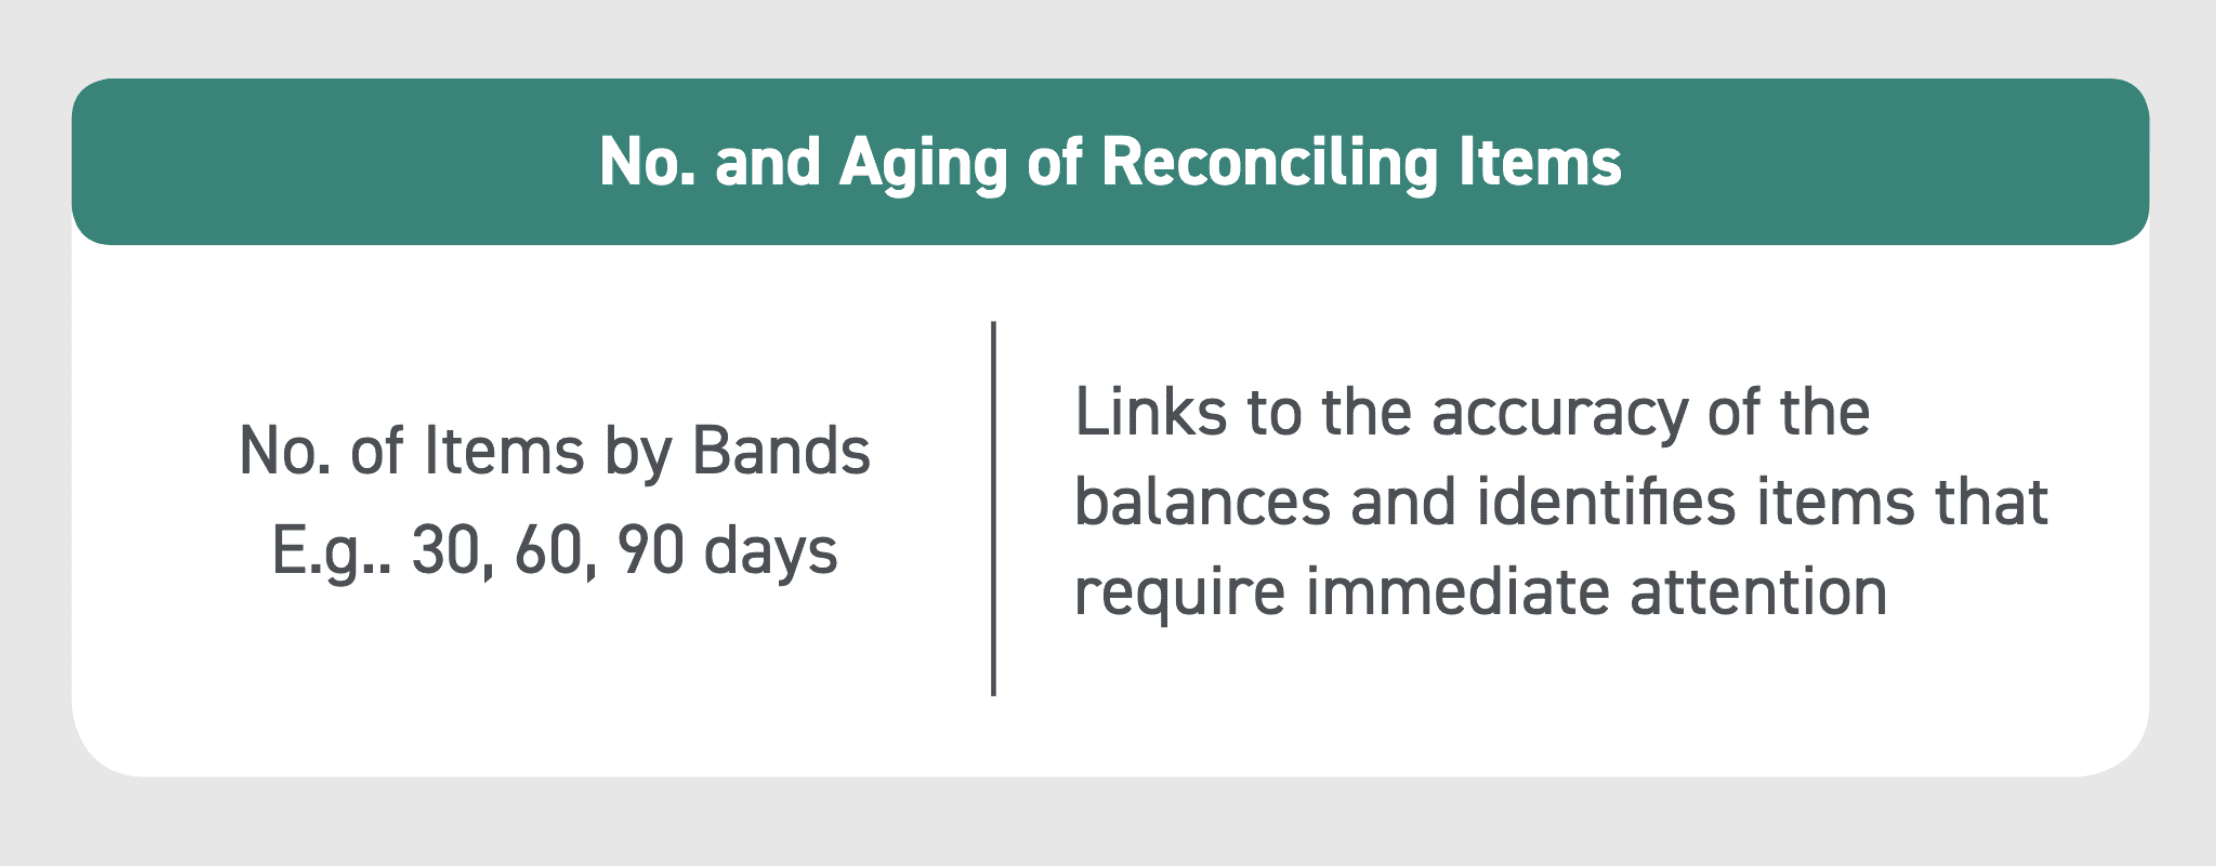 KPI finance and accounting aging reconciliation items